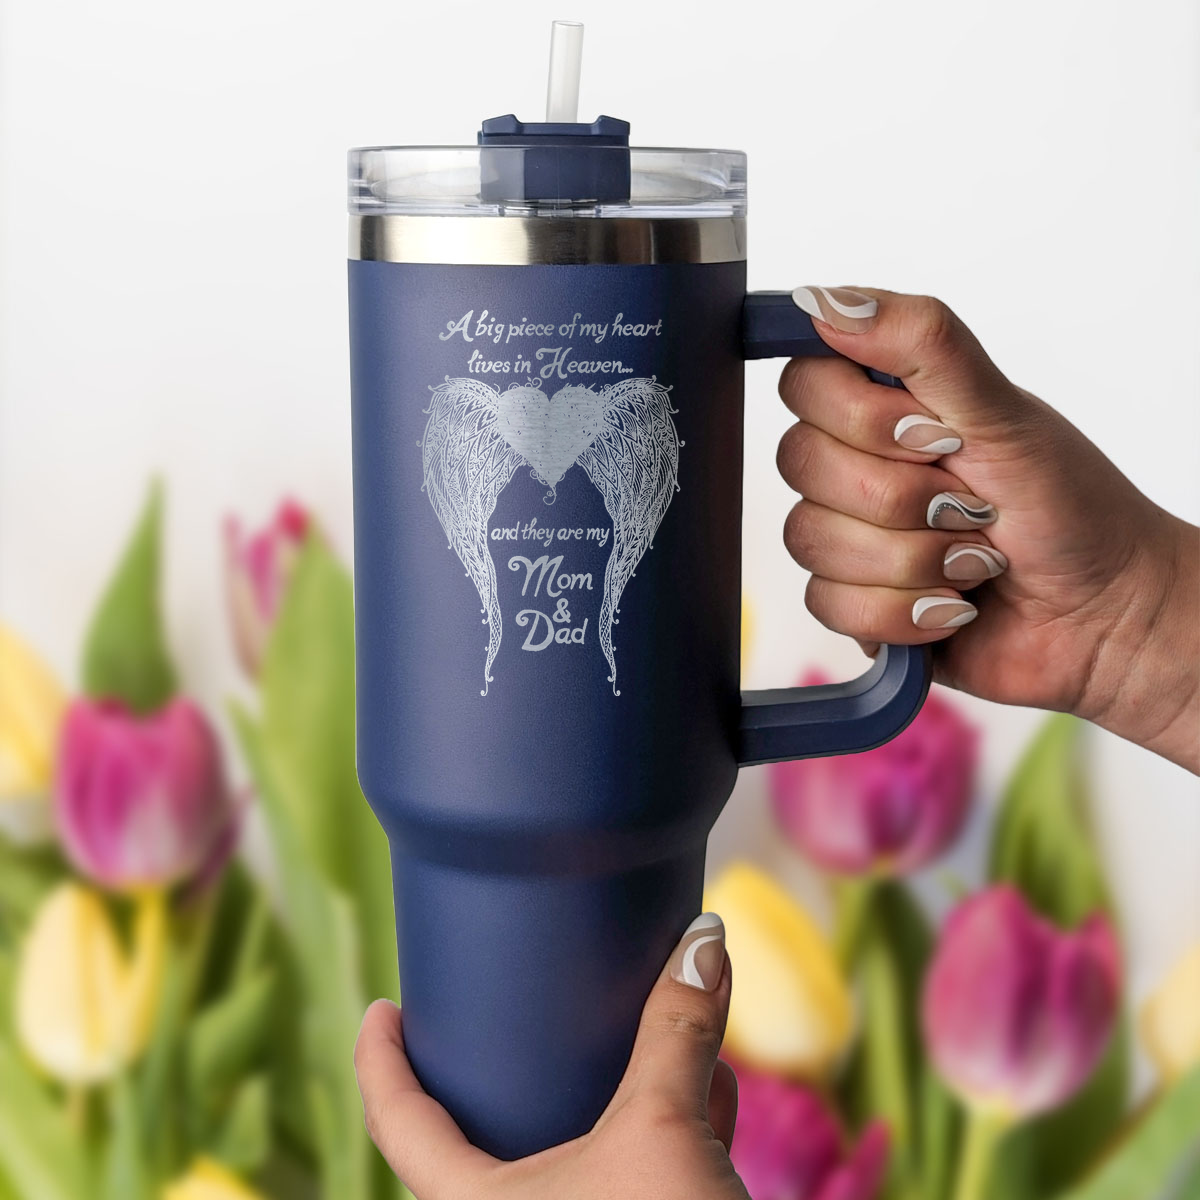 Mom &amp; Dad - A Big Piece of my Heart 40 Ounce Laser Etched Tumbler Dark Blue